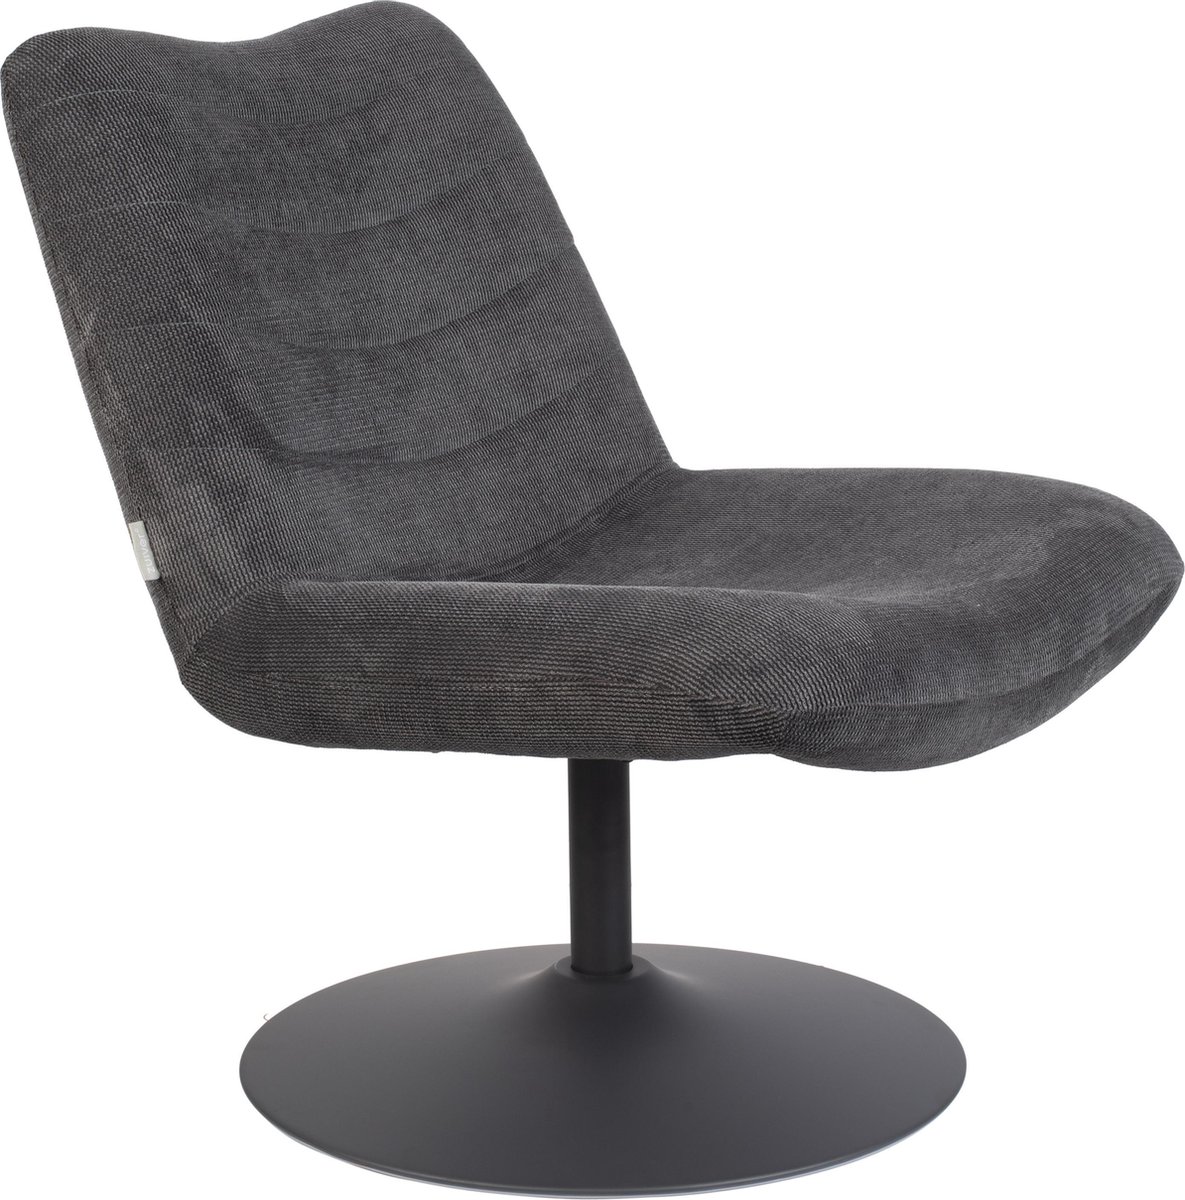 Zuiver Bubba Fauteuil - Donker - Grijs